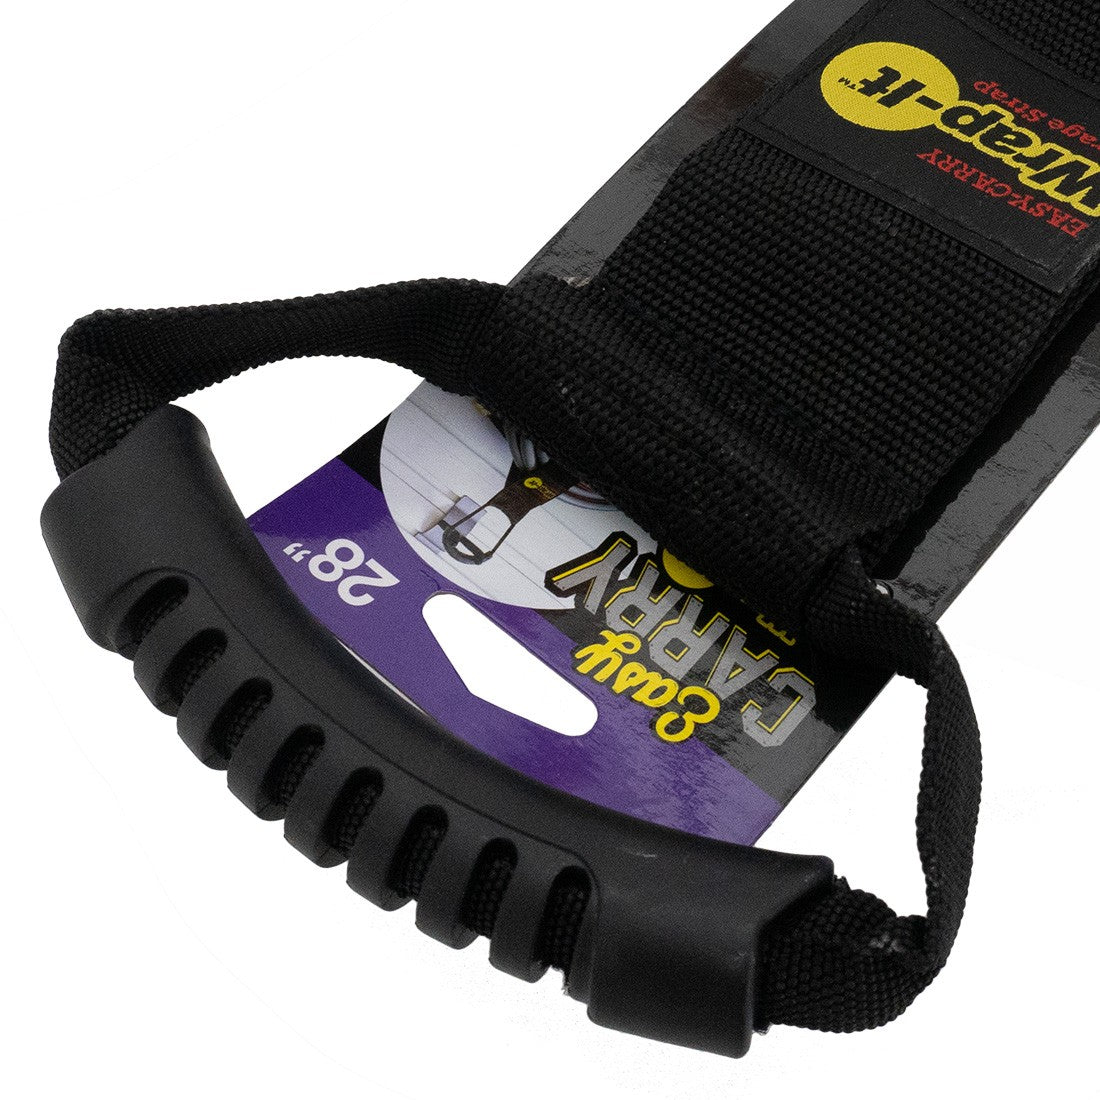 Wrap-It Easy-Carry Storage Strap - 28 Inch Handle Close-Up View